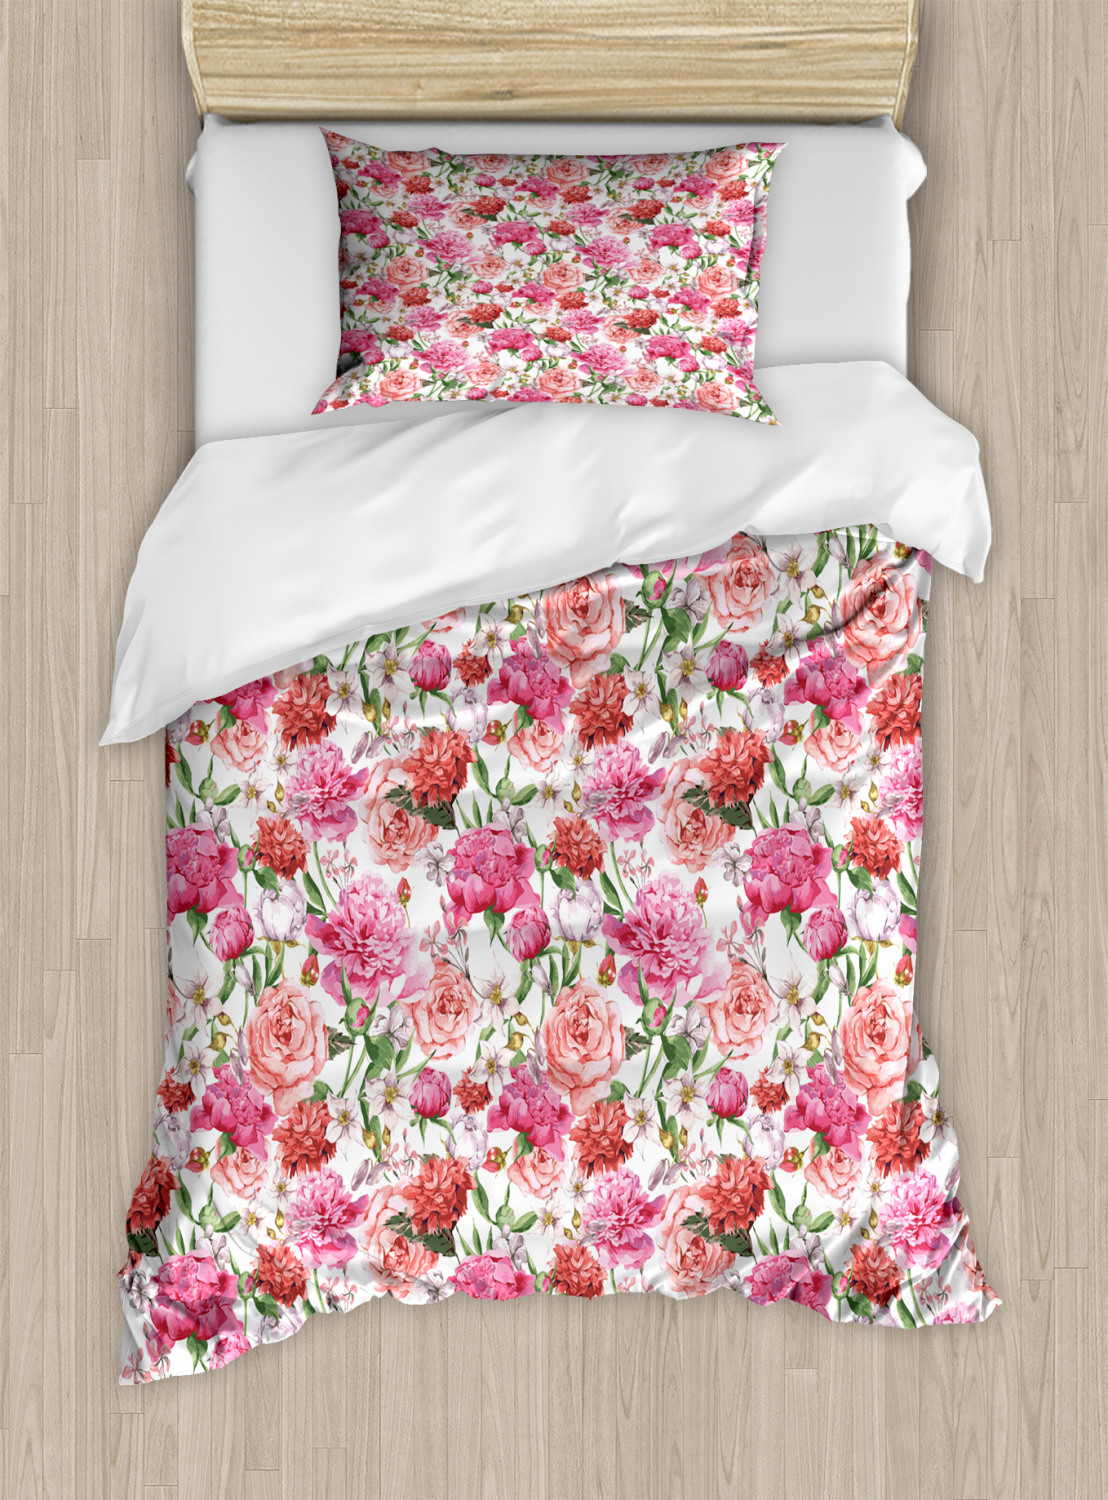 Details about   Shabby Chic Quilted Bedspread & Pillow Shams Set Spring Garden Roses Print 